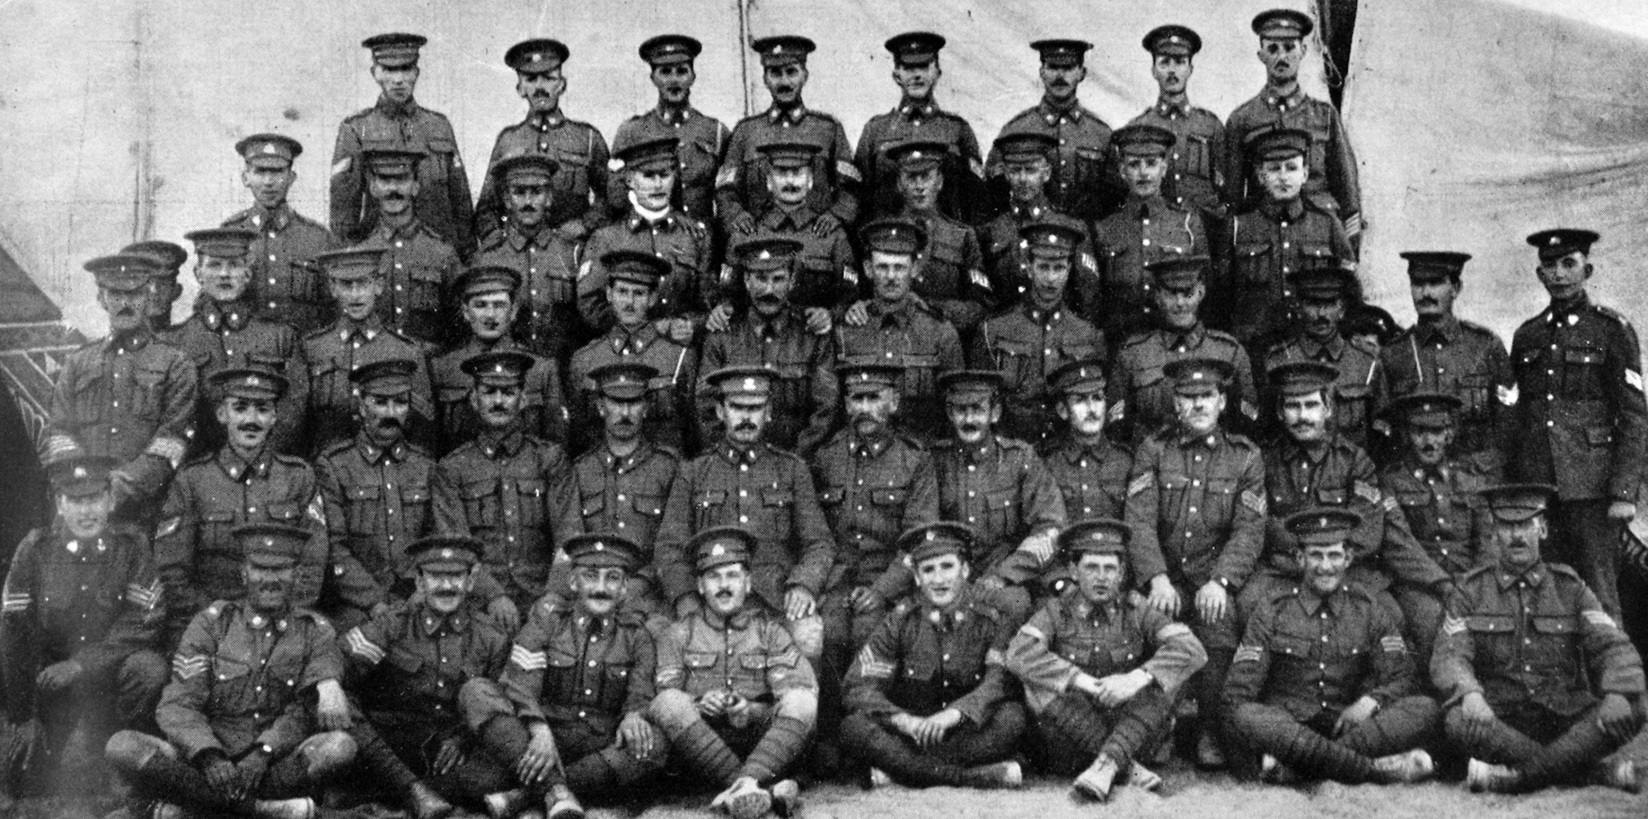 The non-commissioned officers of the Otago Infantry Group pictured just before their departure...